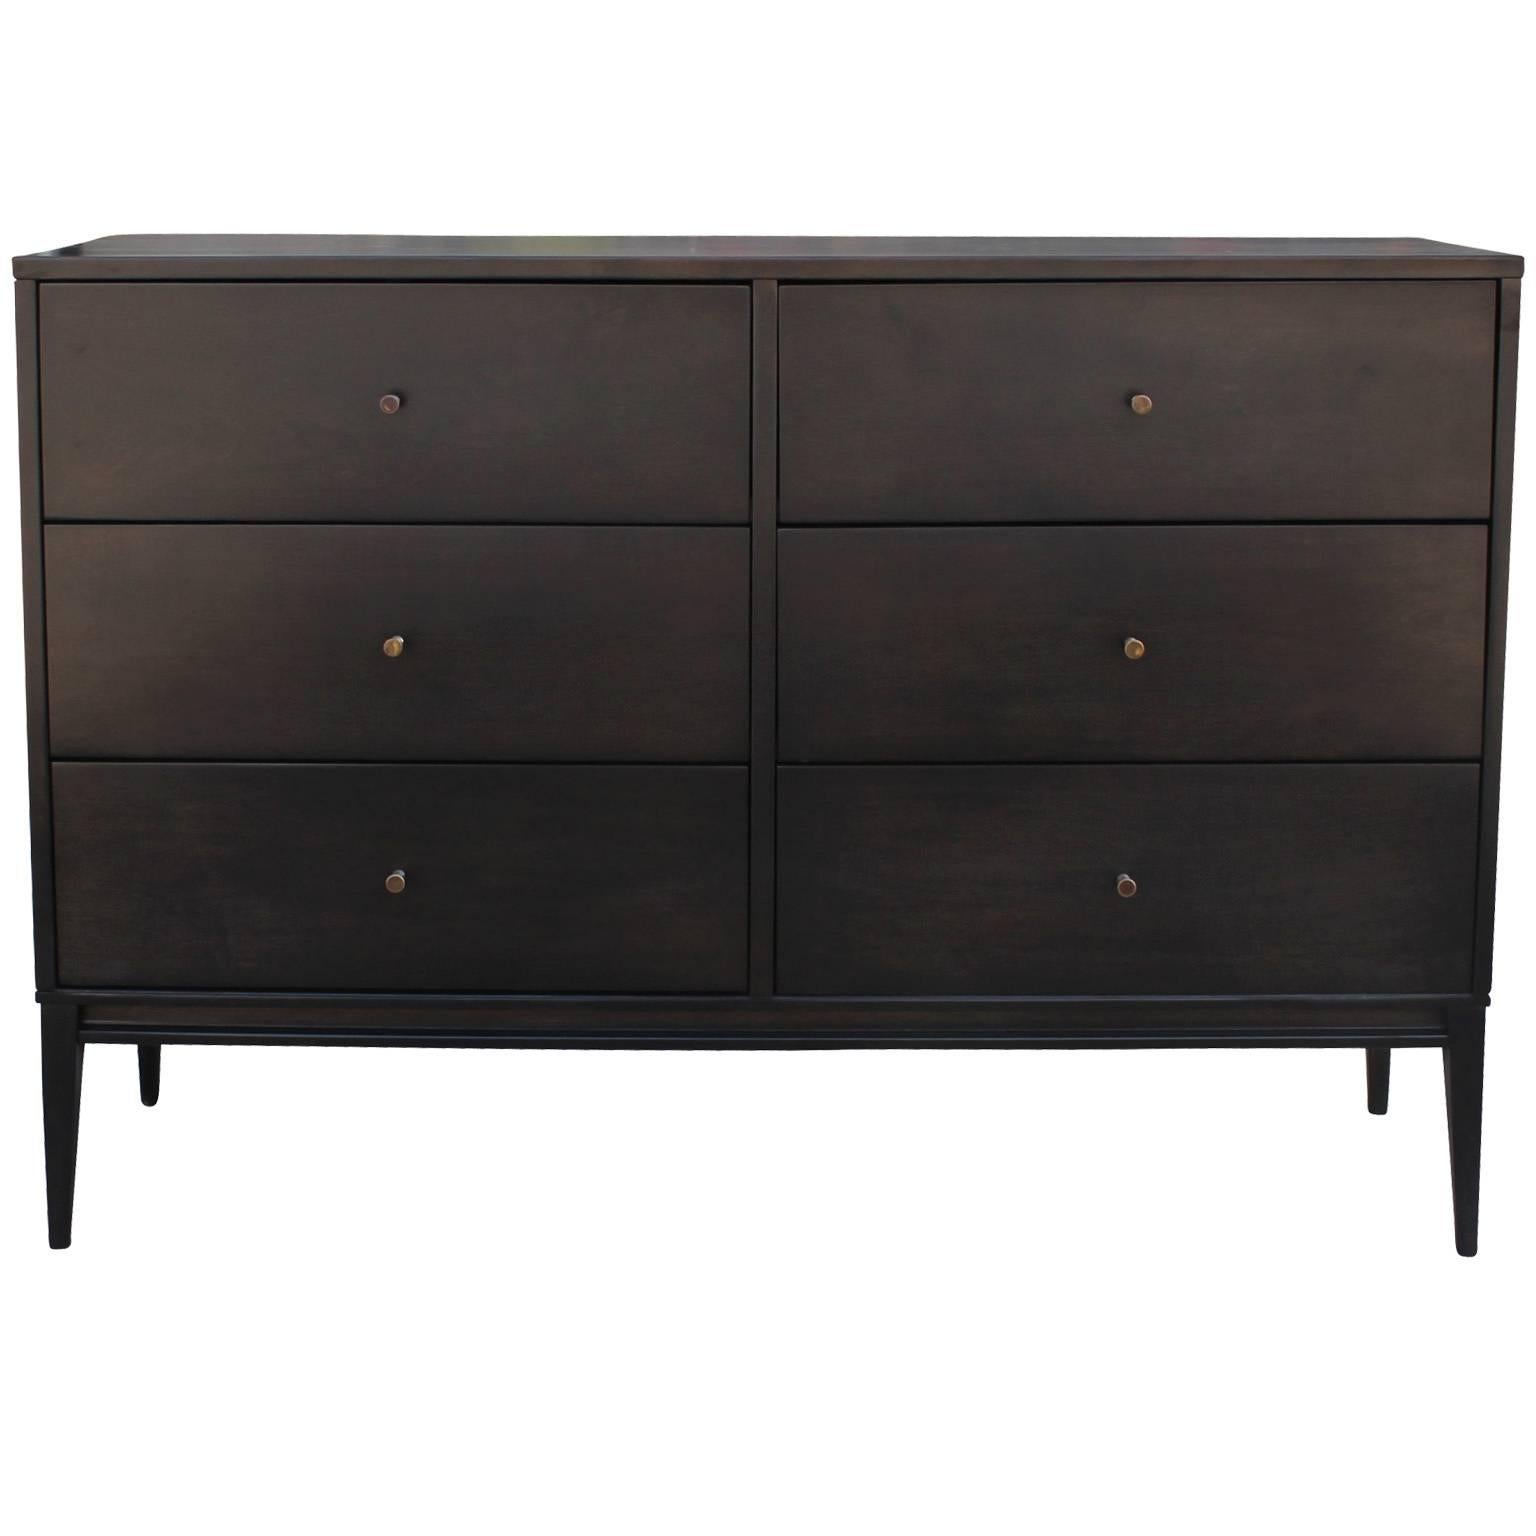 Wonderful dresser by Paul McCobb for Planner Group. Dresser is finished in an black ebony stain. Brass pulls add contrast to the piece. Delicate tapered legs finish the piece. Six deep drawers provide ample storage. Retains original labels.